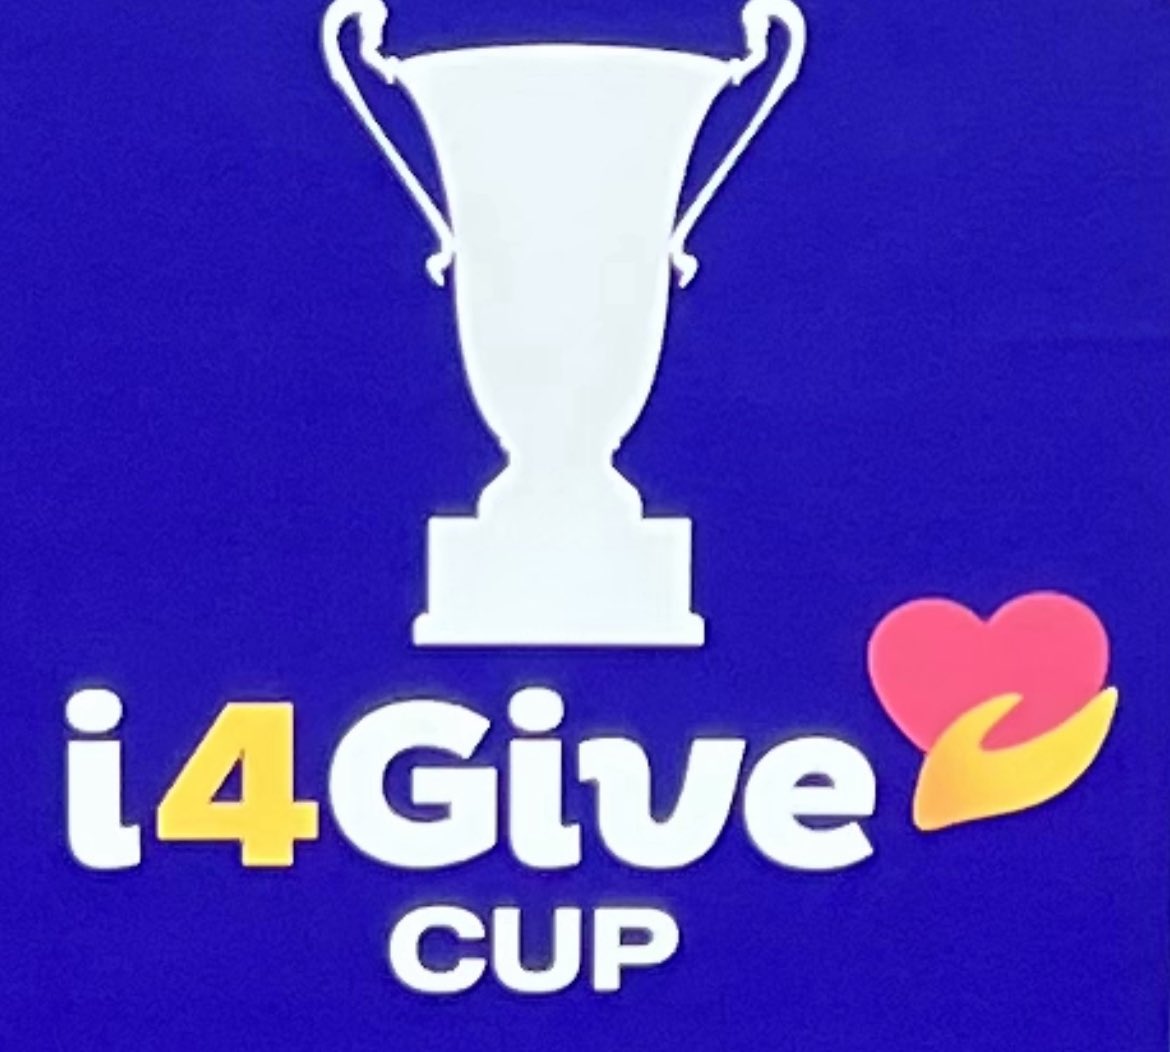 The @TheParraEels vs @NRL_Bulldogs are playing for the i4give cup - This Monday at @AccorStadium 4pm